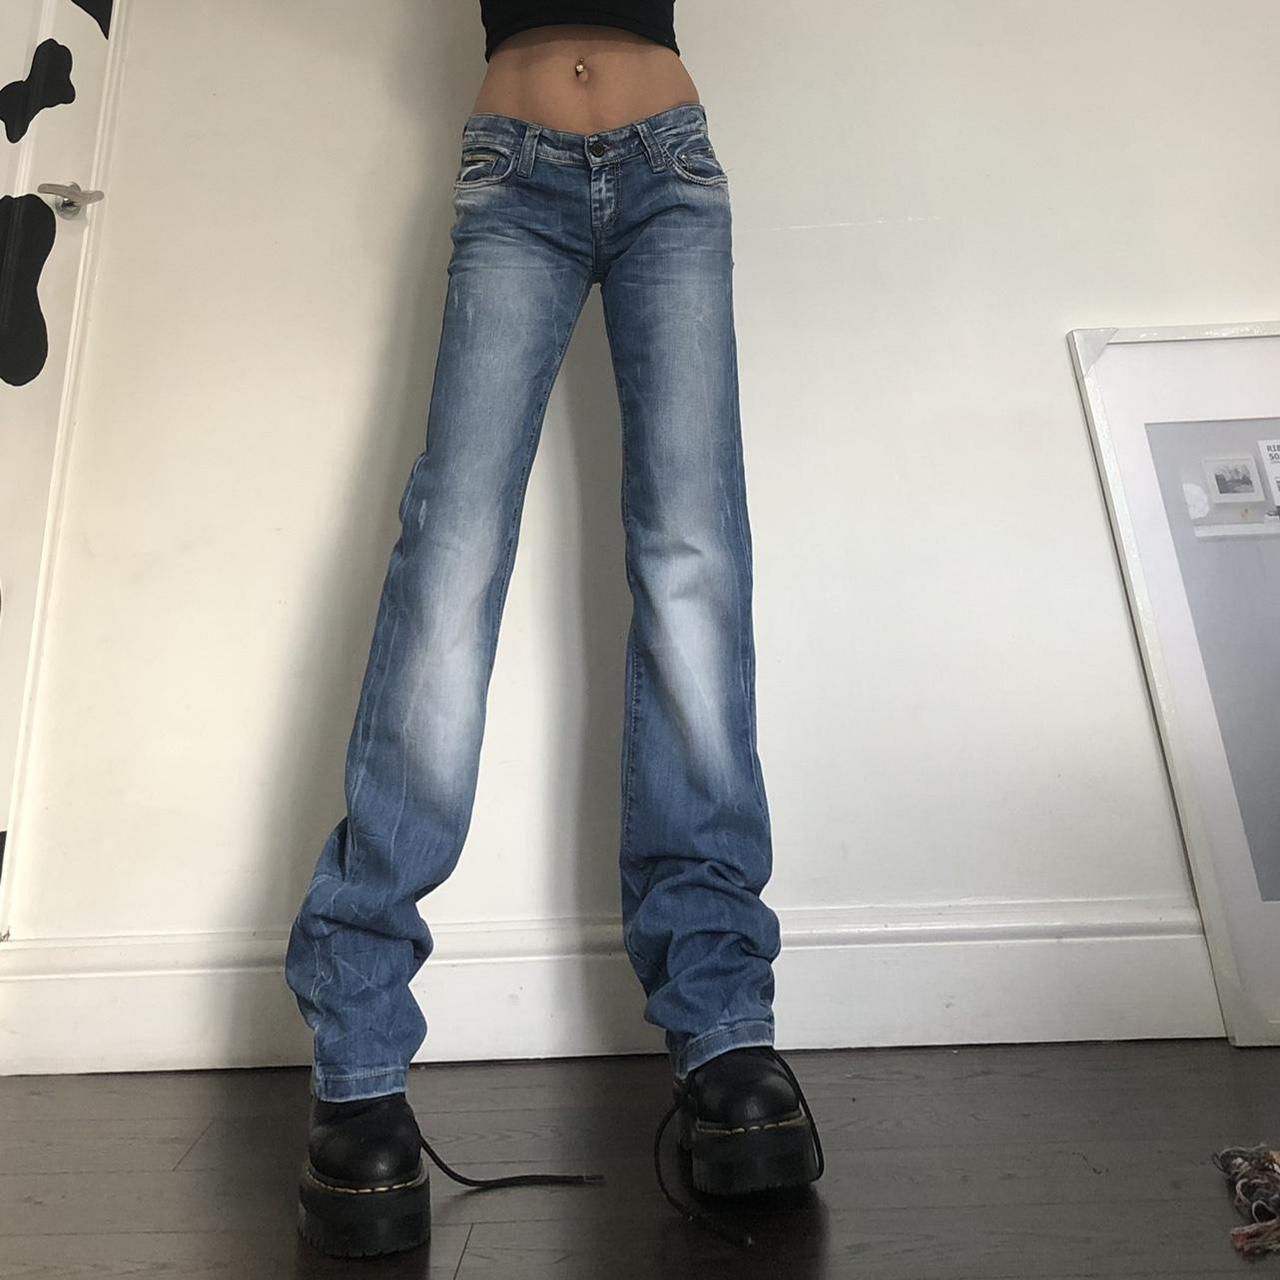 Super low rise Y2K low jeans faded jeans with... - Depop